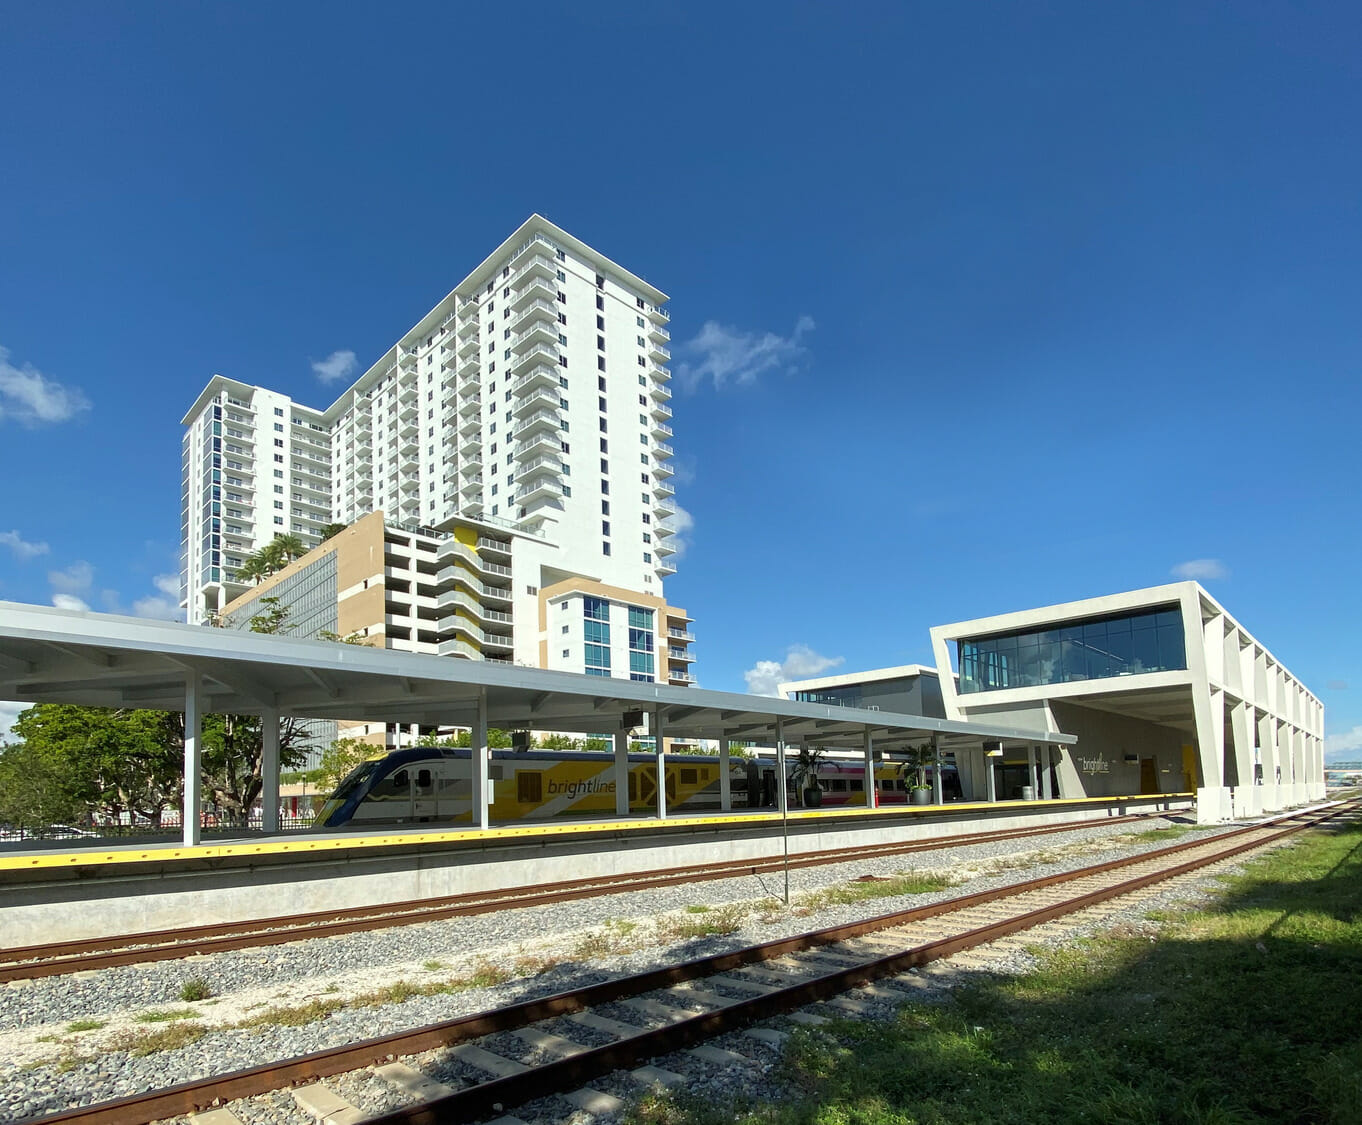 A train station with a tall building in the background.